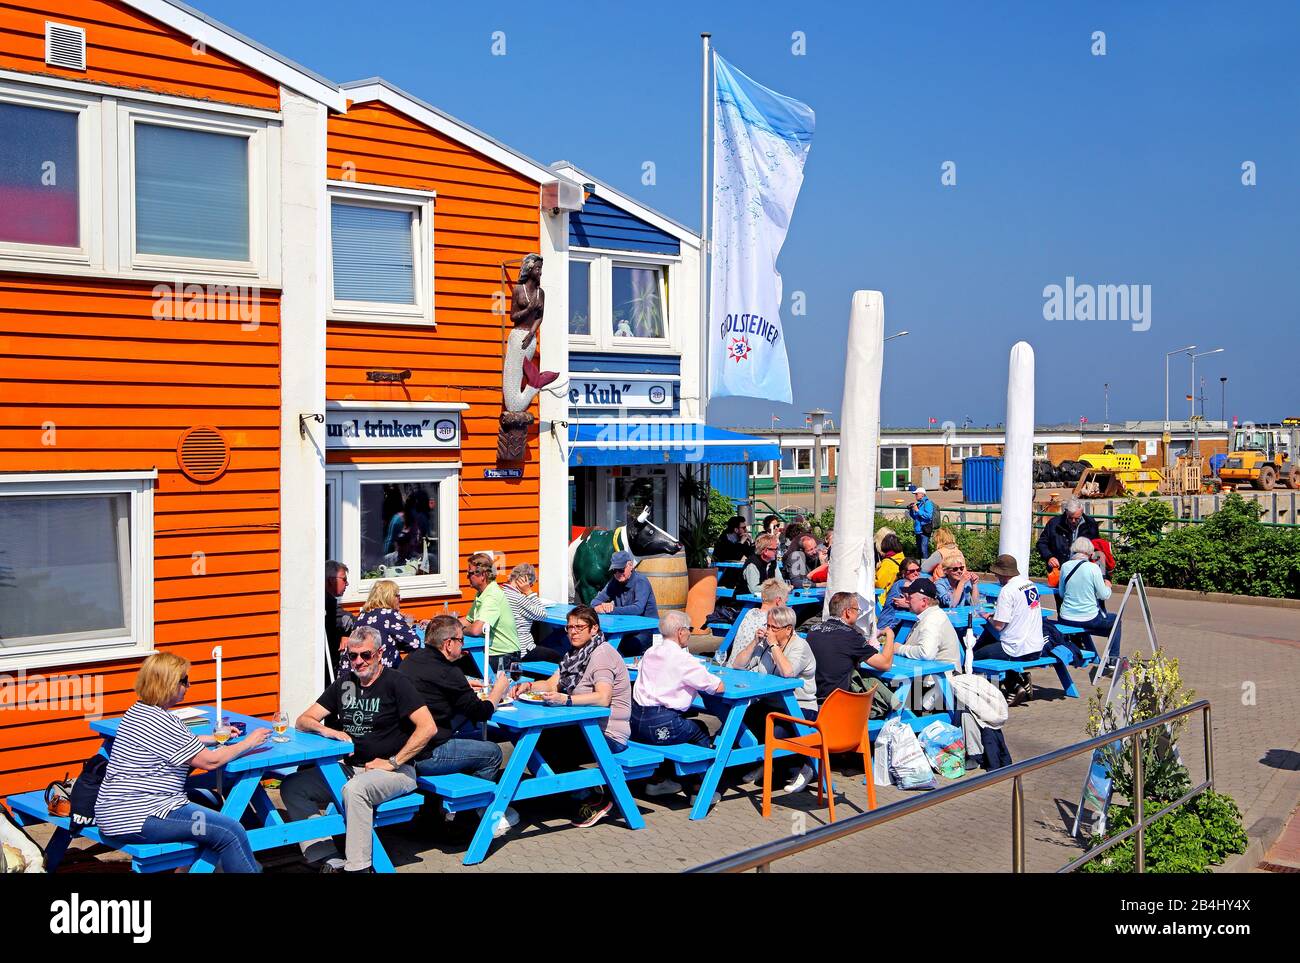 Outdoor terrace of the restaurant Bunte Kuh in Hummerbuden at the harbor, Helgoland, Helgoland Bay, German Bight, North Sea Island, North Sea, Schleswig-Holstein, Germany Stock Photo